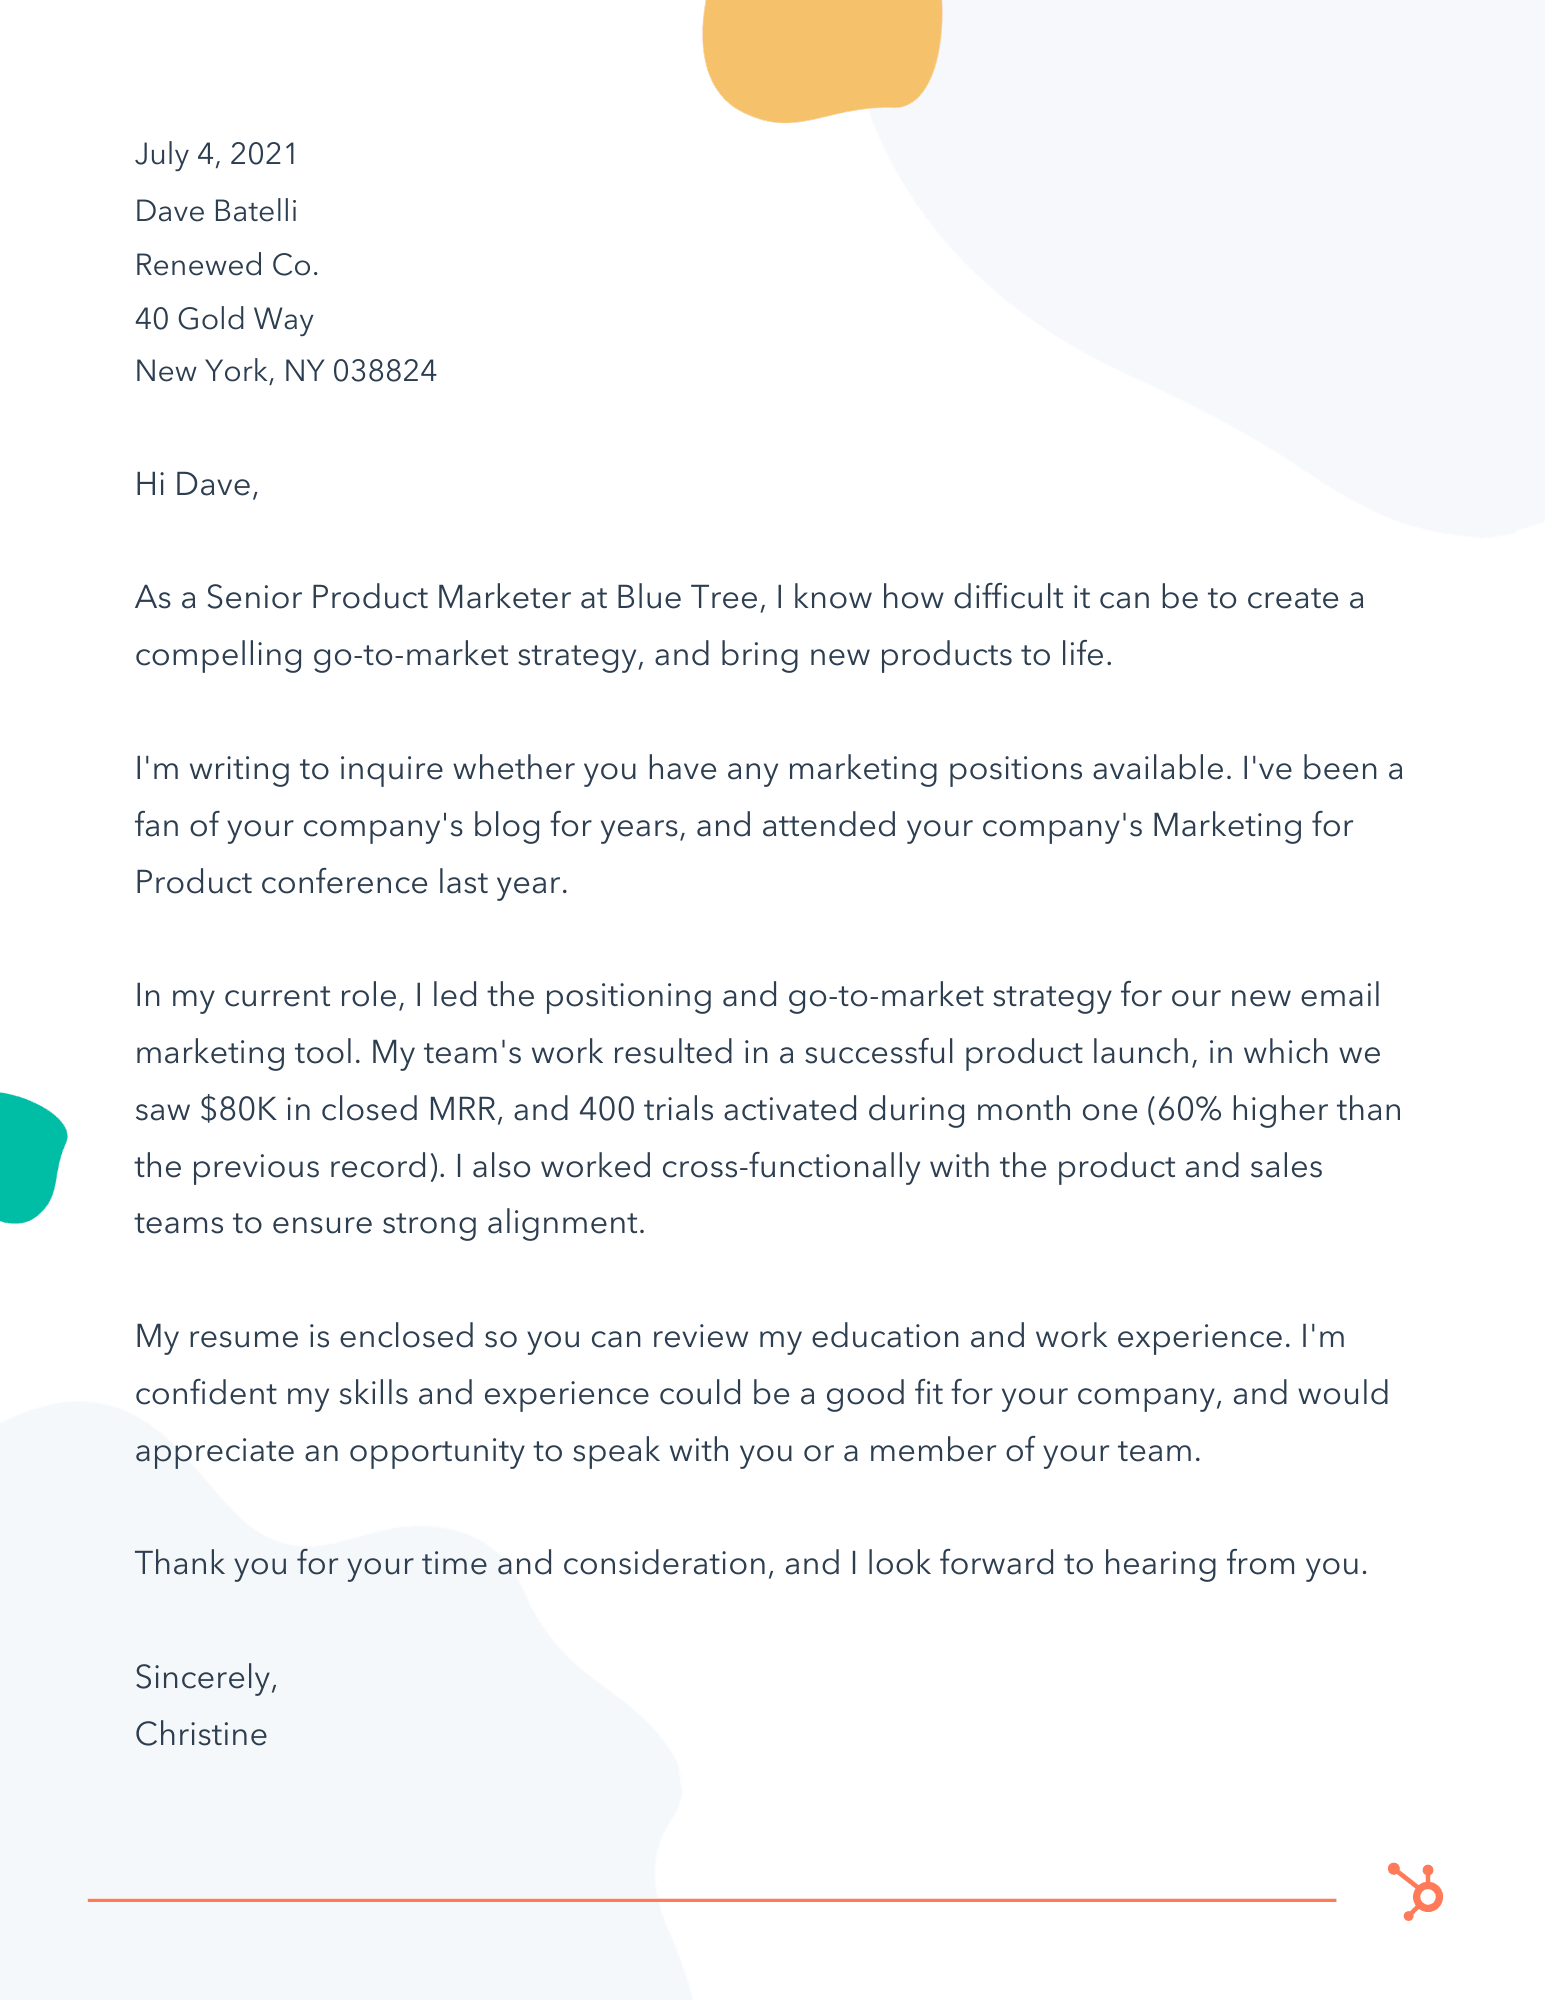 How to Write a Letter of Interest in 12 [Examples + Template]